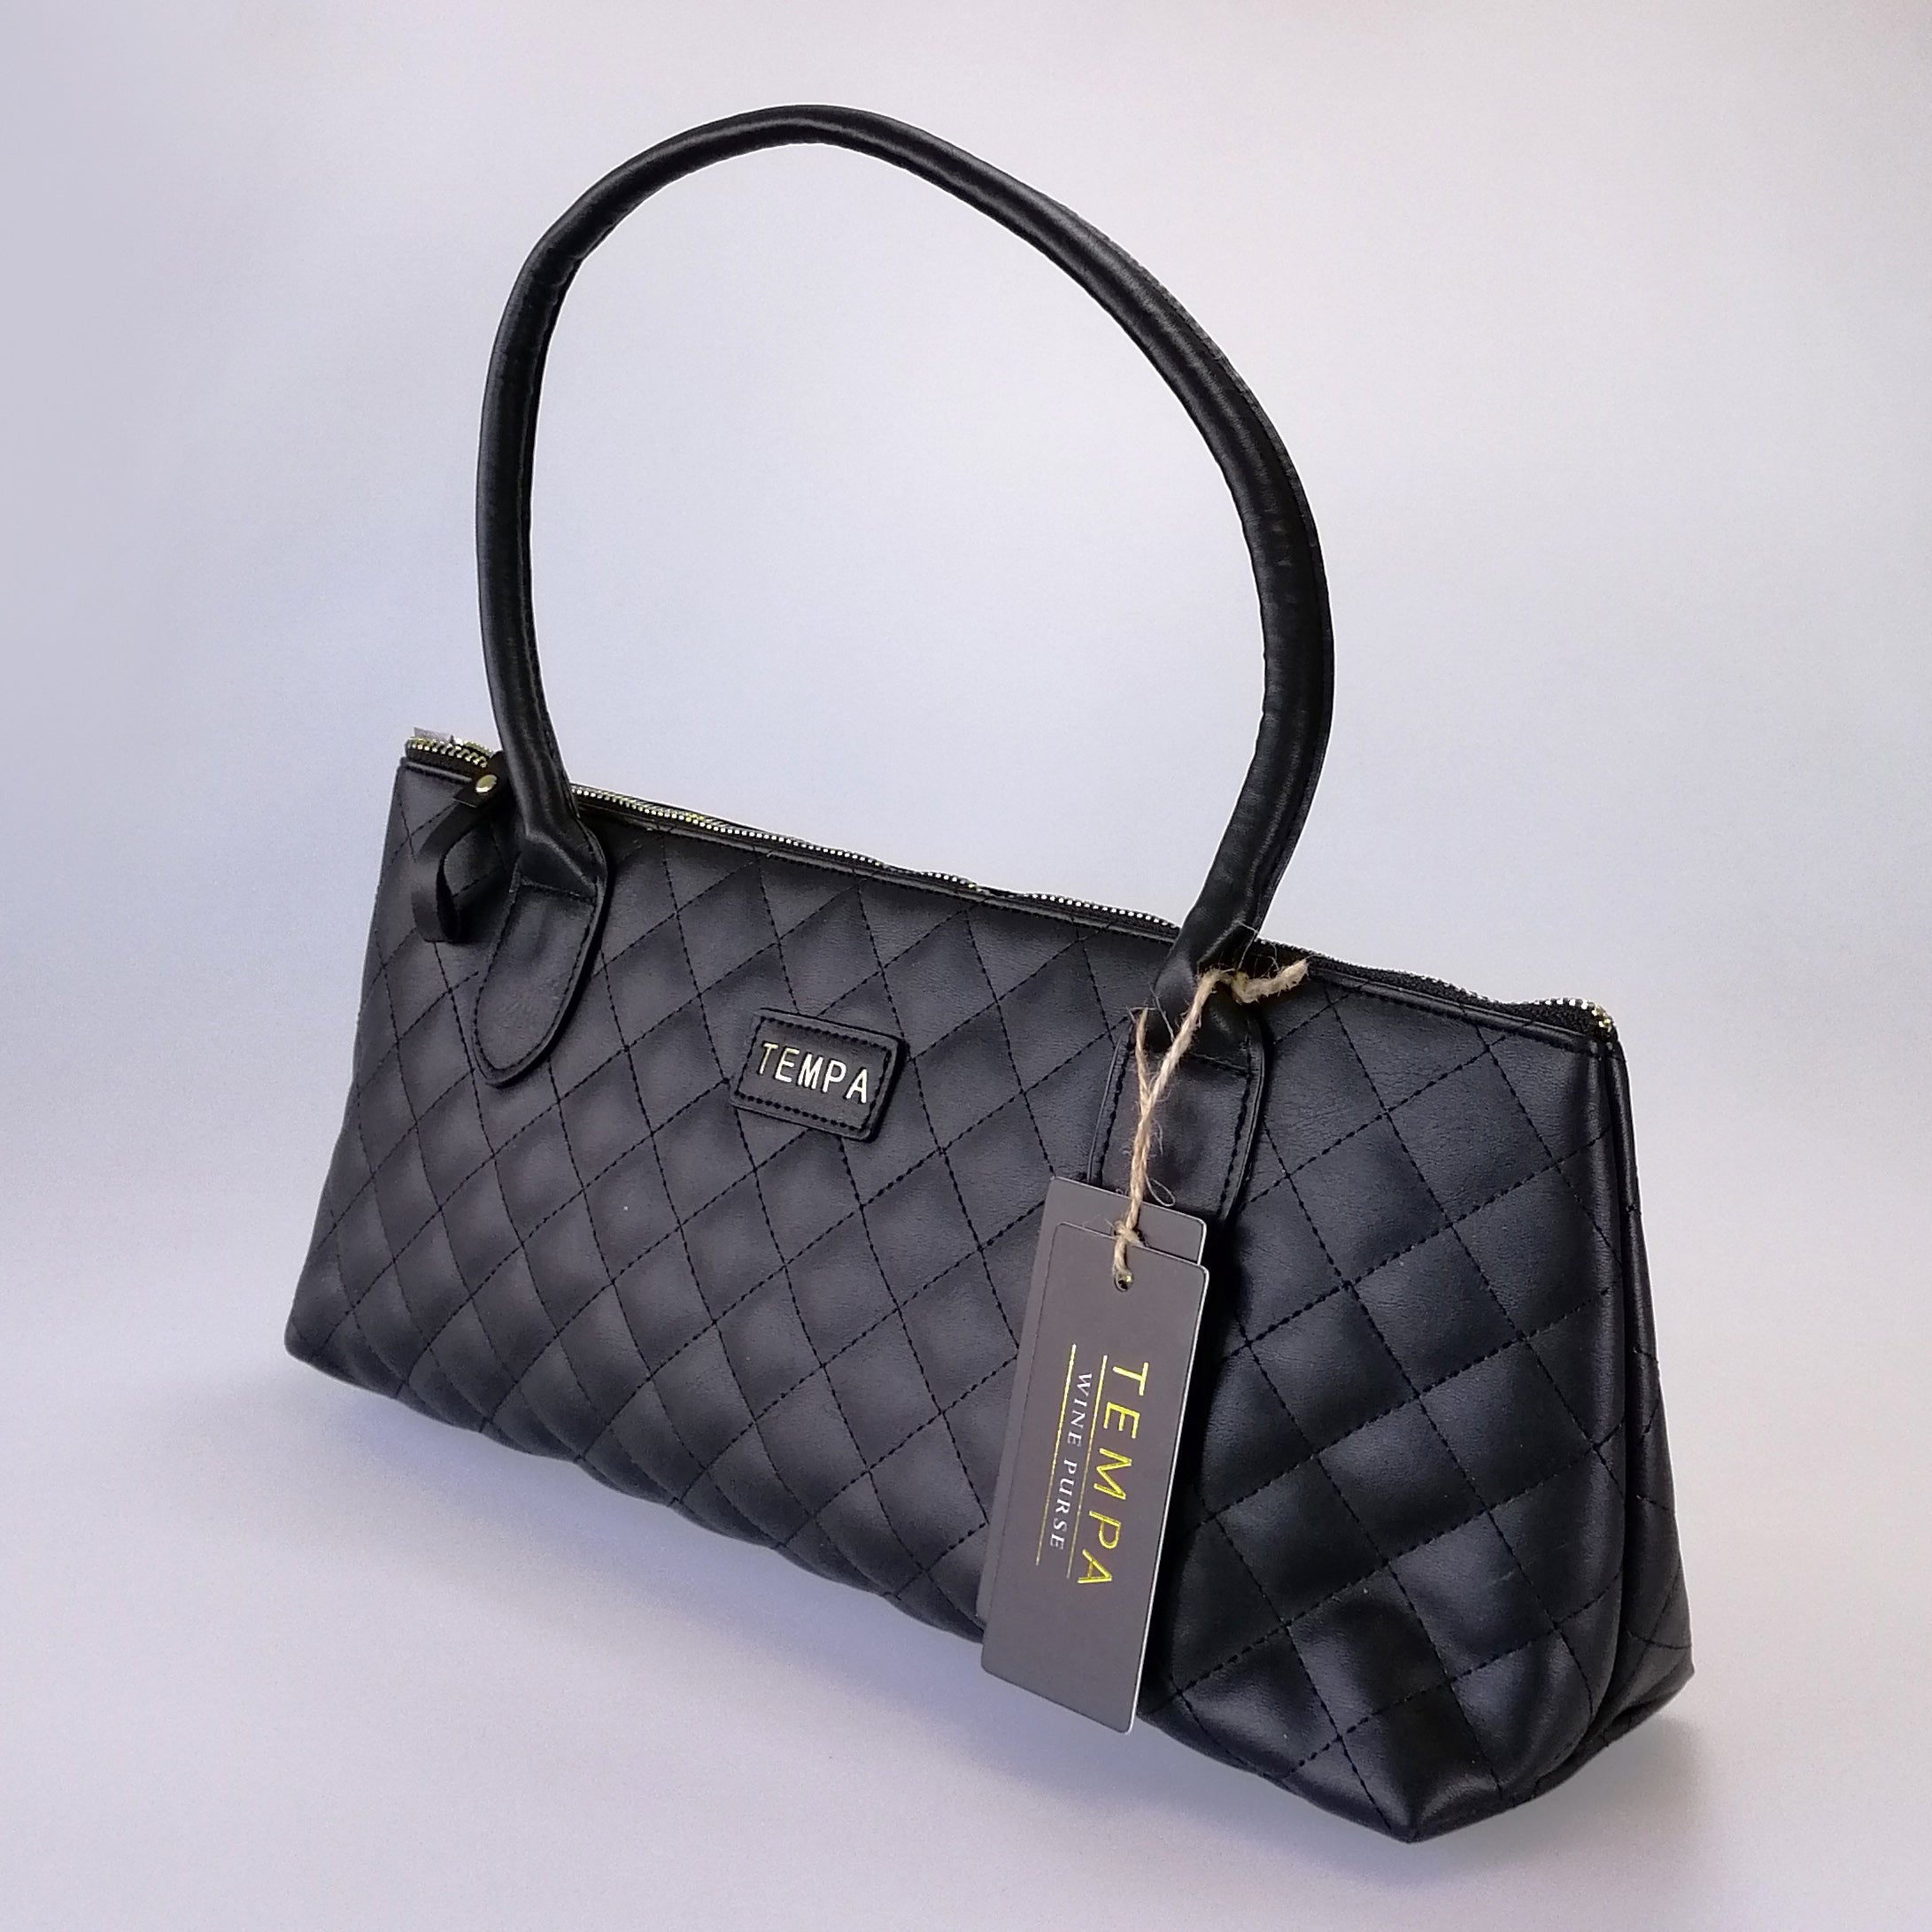 Tempa - Insulated Wine Purse - Quilted Black